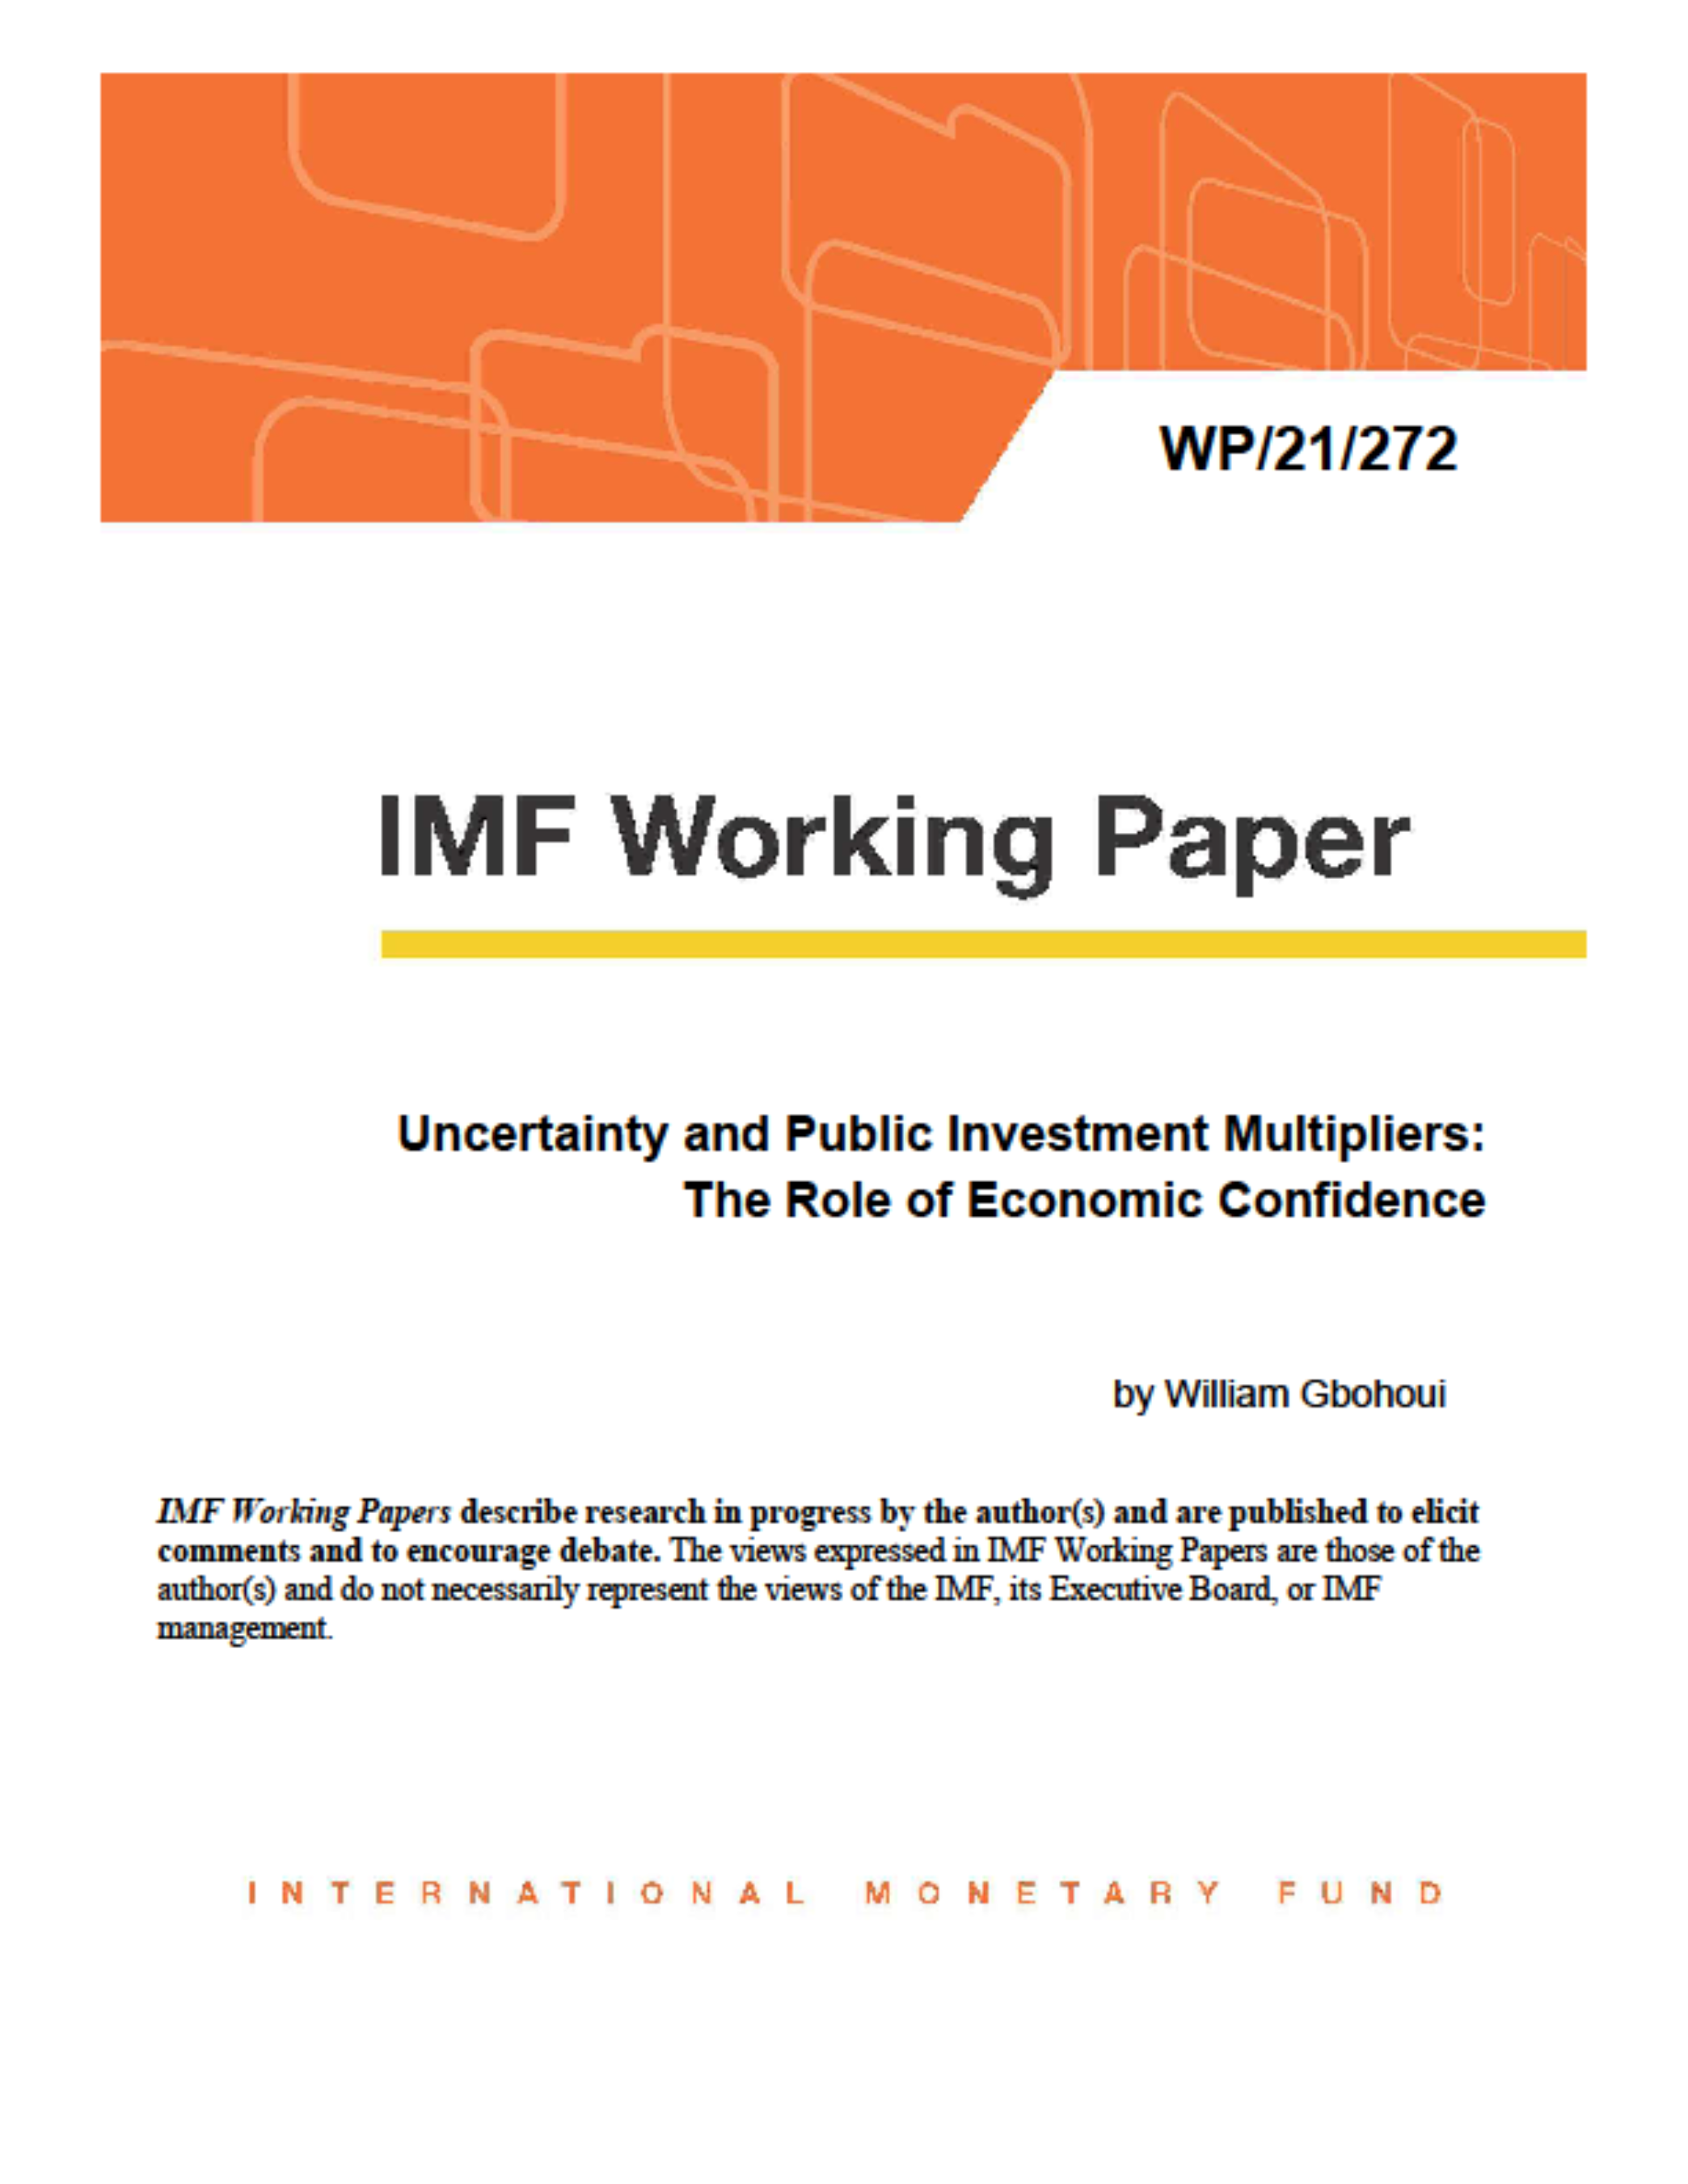 Uncertainty and Public Investment Multipliers:  The Role of Economic Confidence